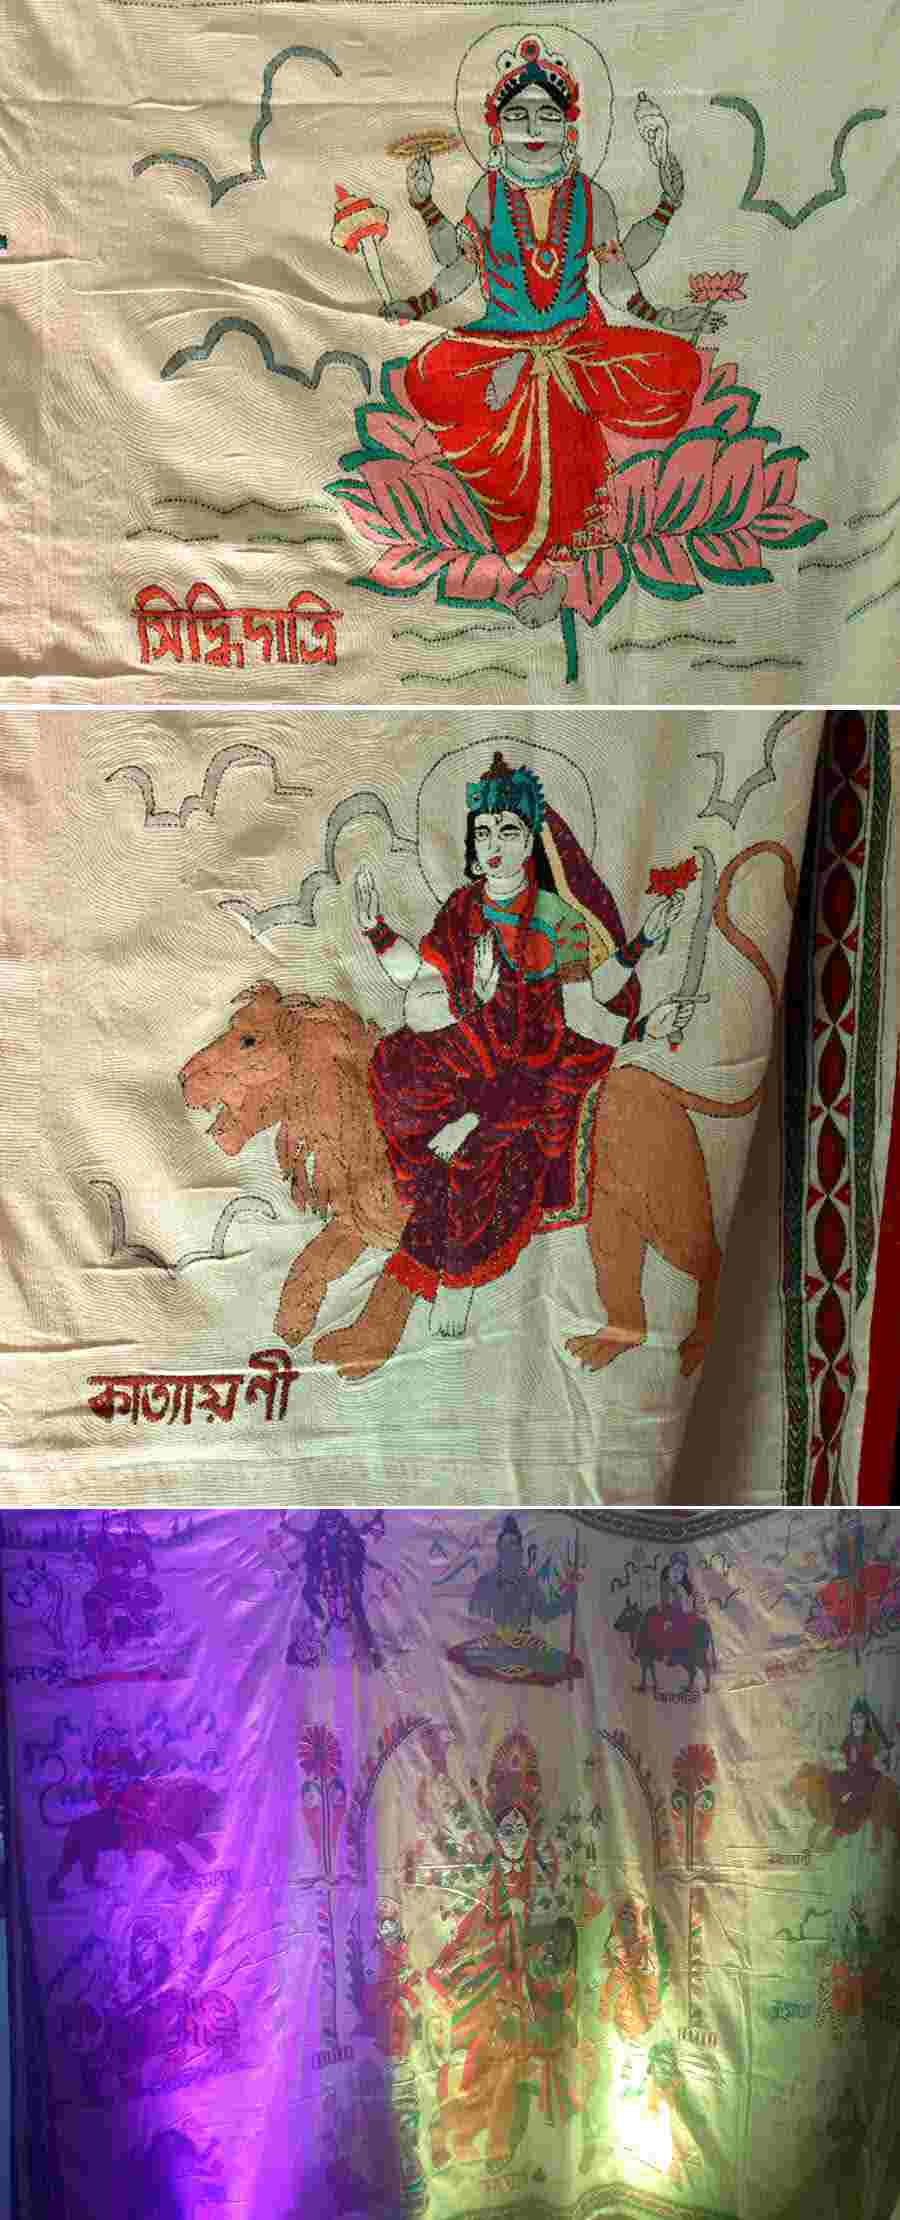 As one enters the exhibition, a wall hanging depicting Durga in her different avatars catches the eye. This particular piece took around four years to complete.